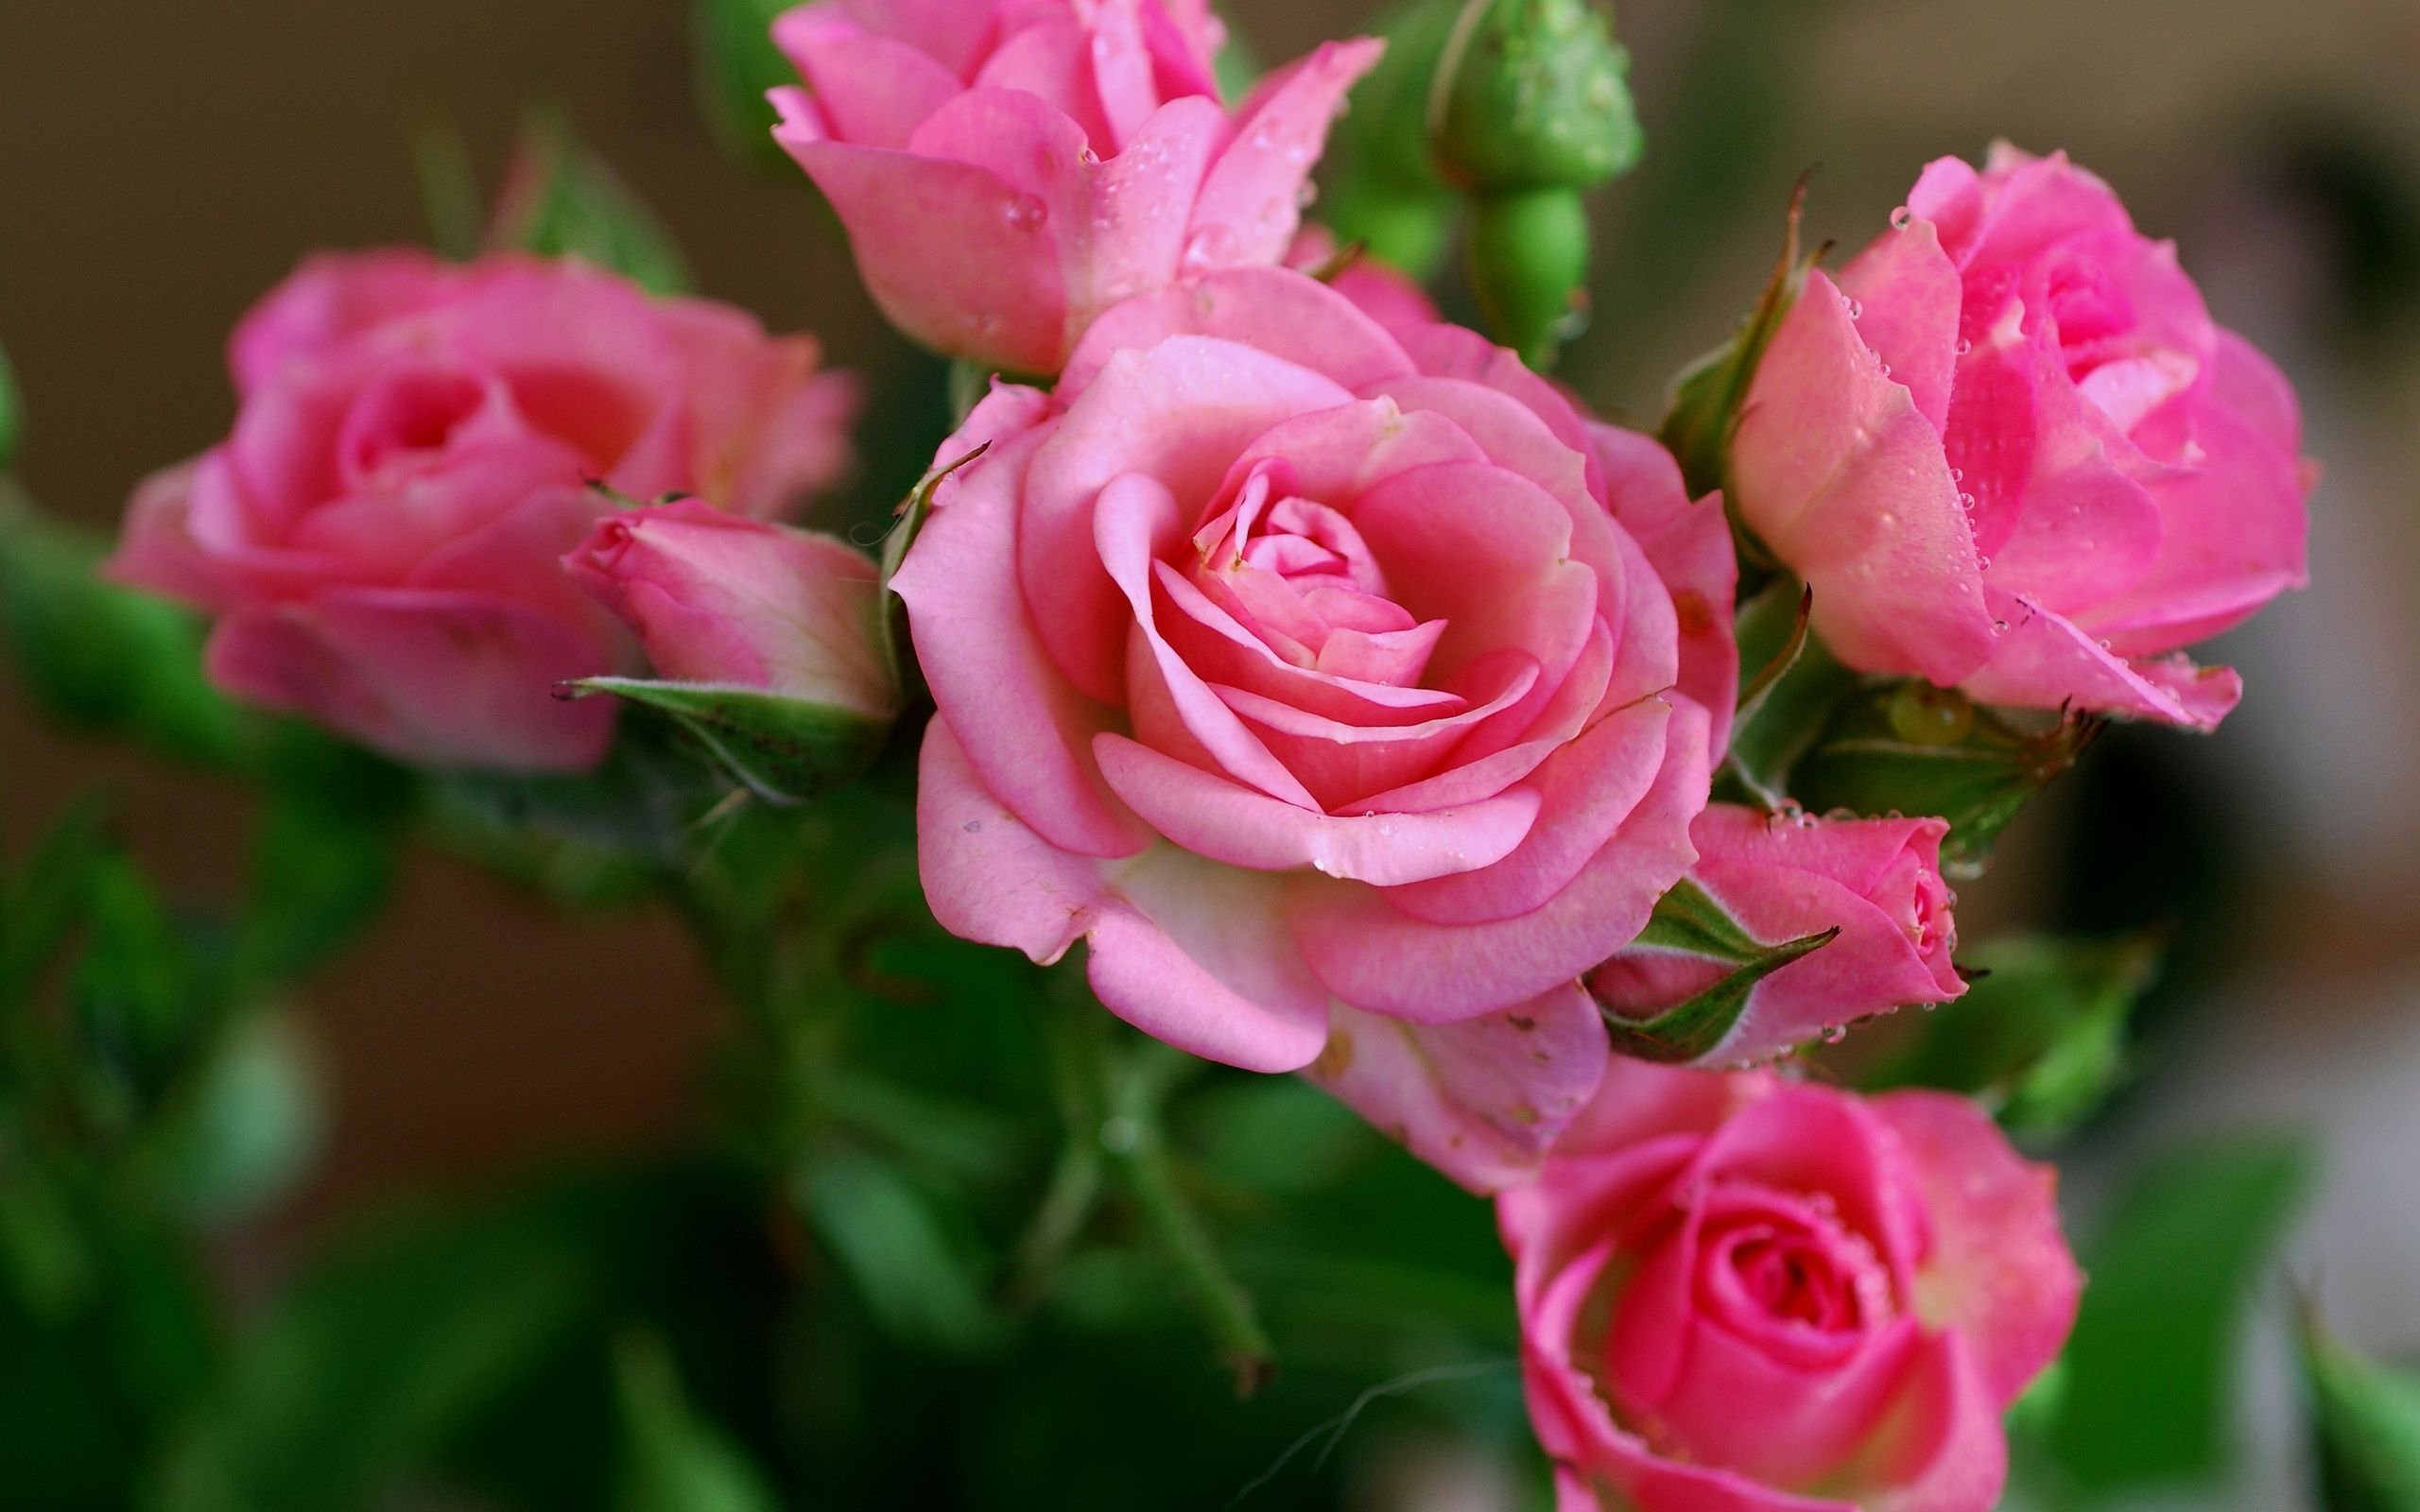  Pink rose flowers Nature wallpapers download HD Wallpapers for 2560x1600